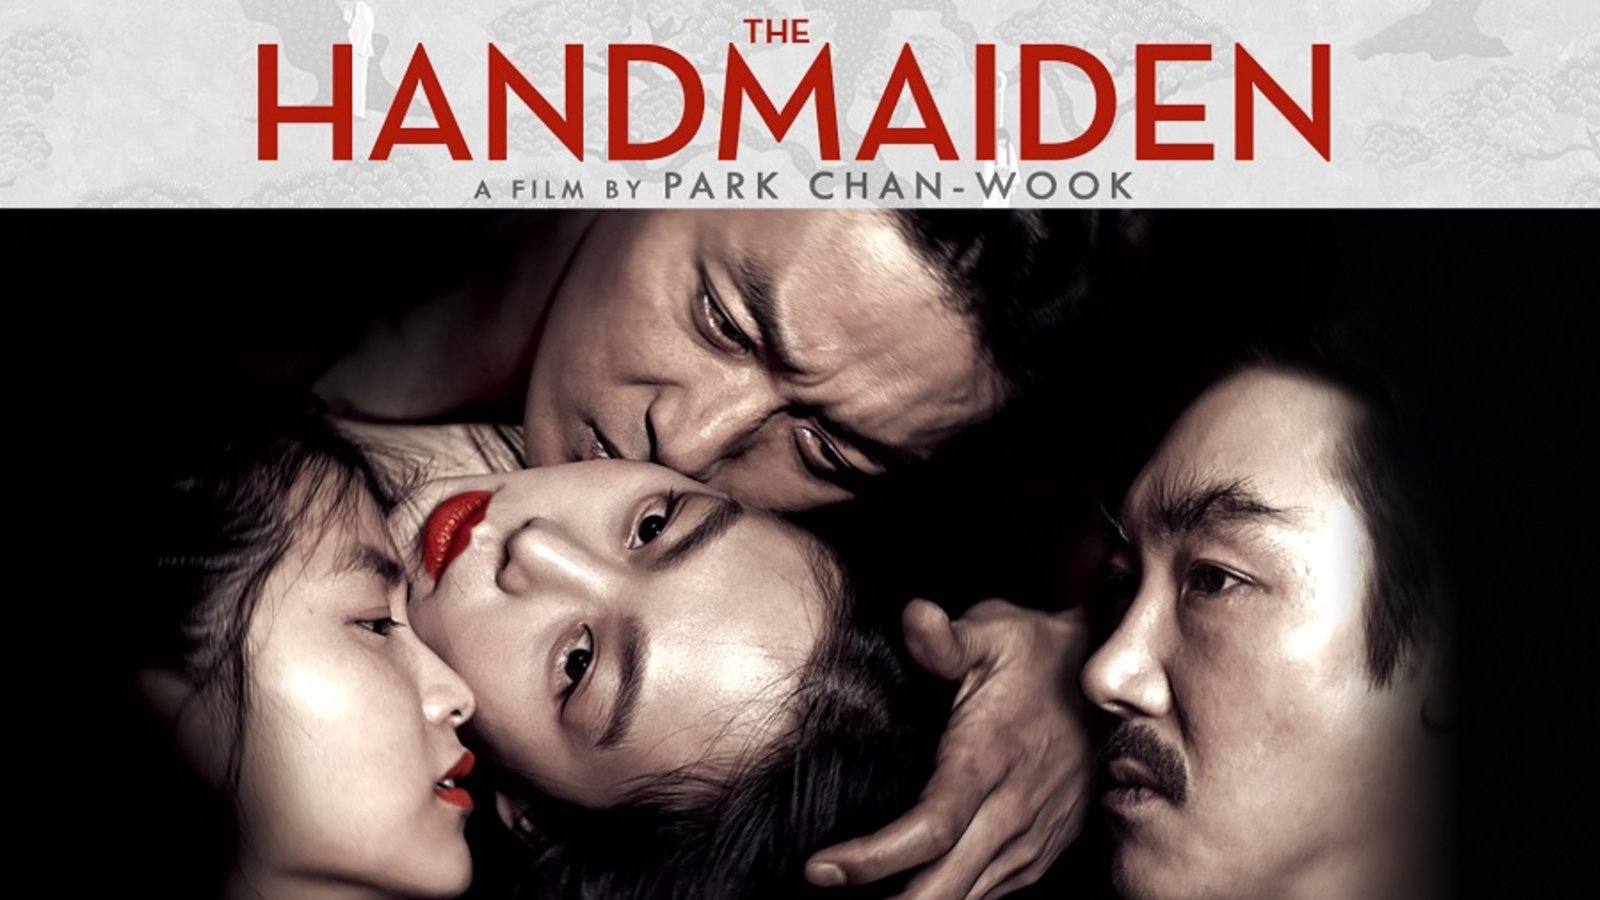 the handmaiden extended english subtitles